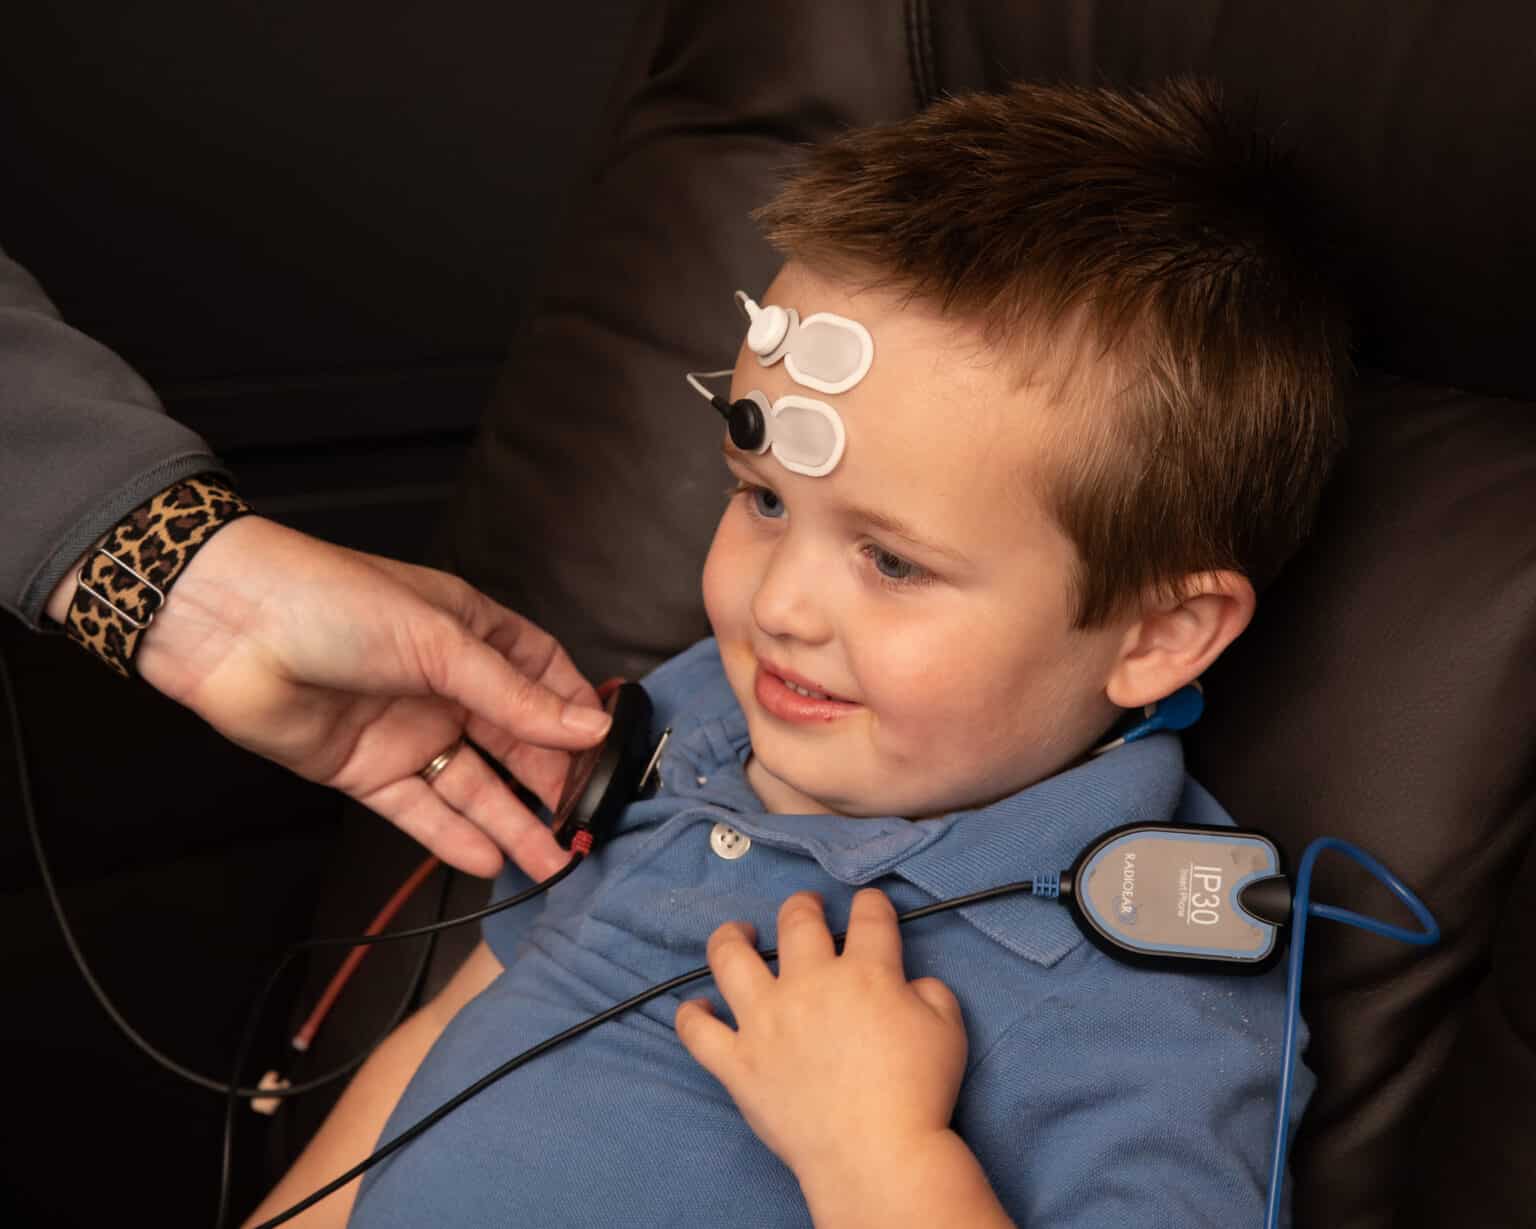 Child being fitted with an implantable hearing device